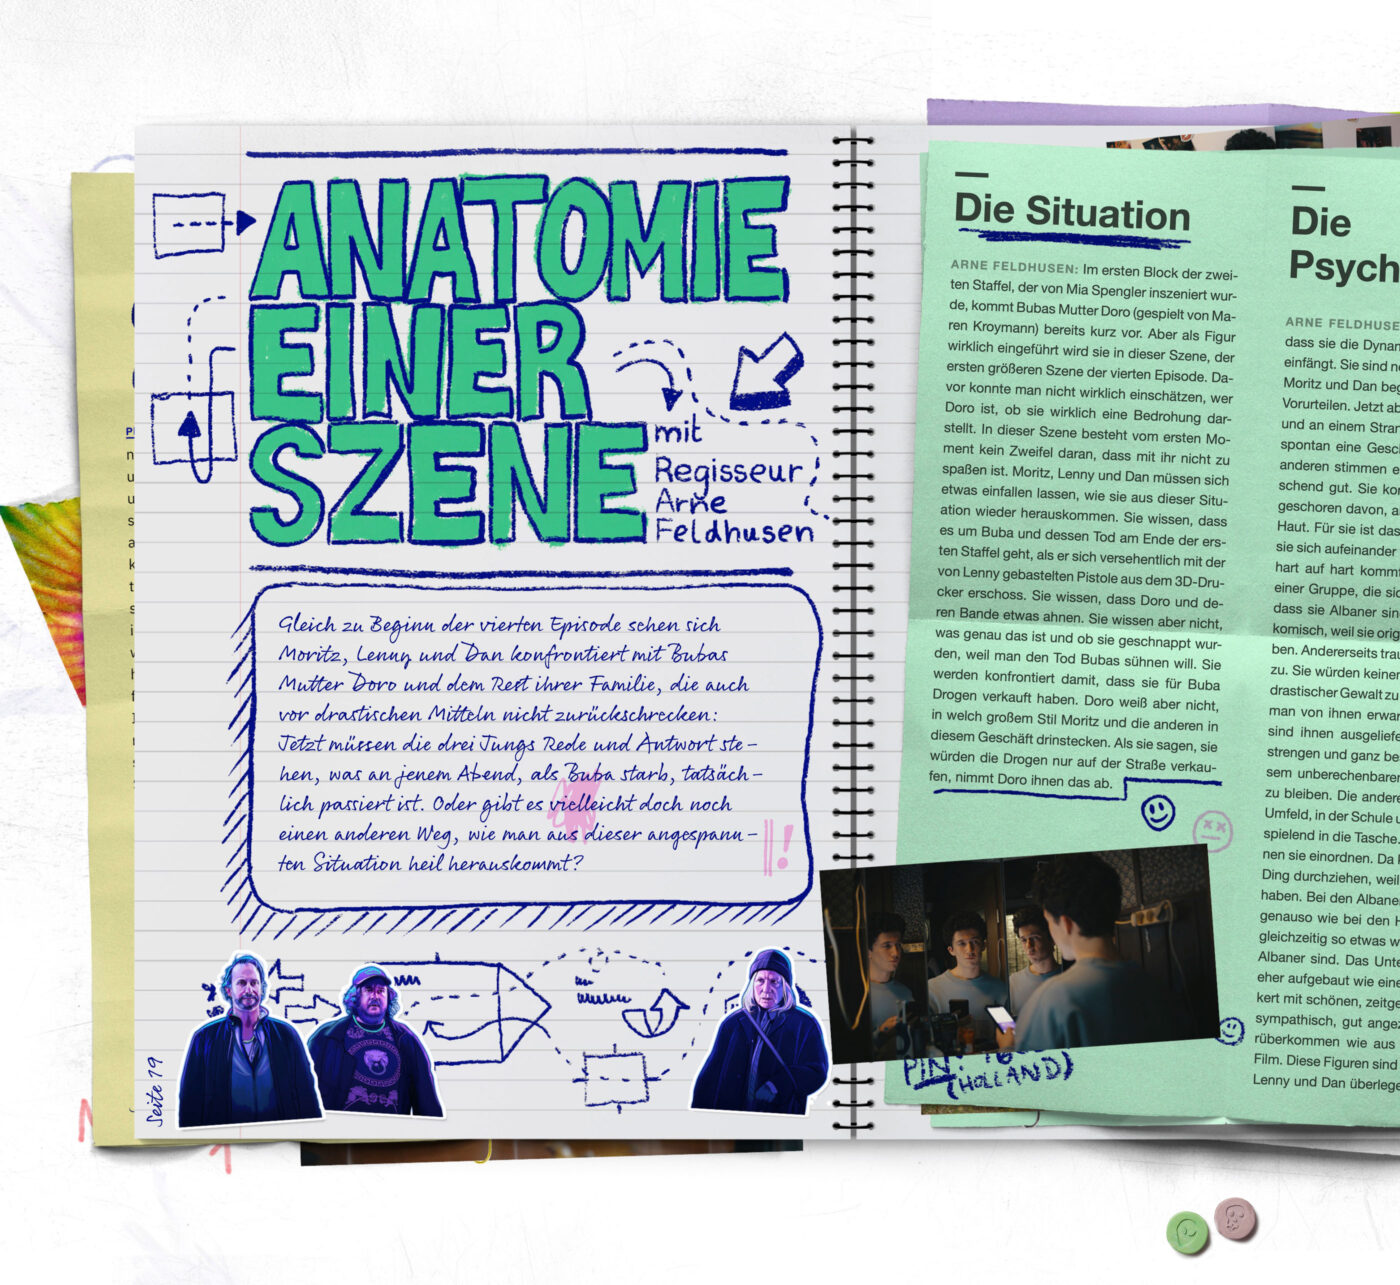 How To Sell Drugs Online Fast – Season 2 – Press Kit Magazine – Details